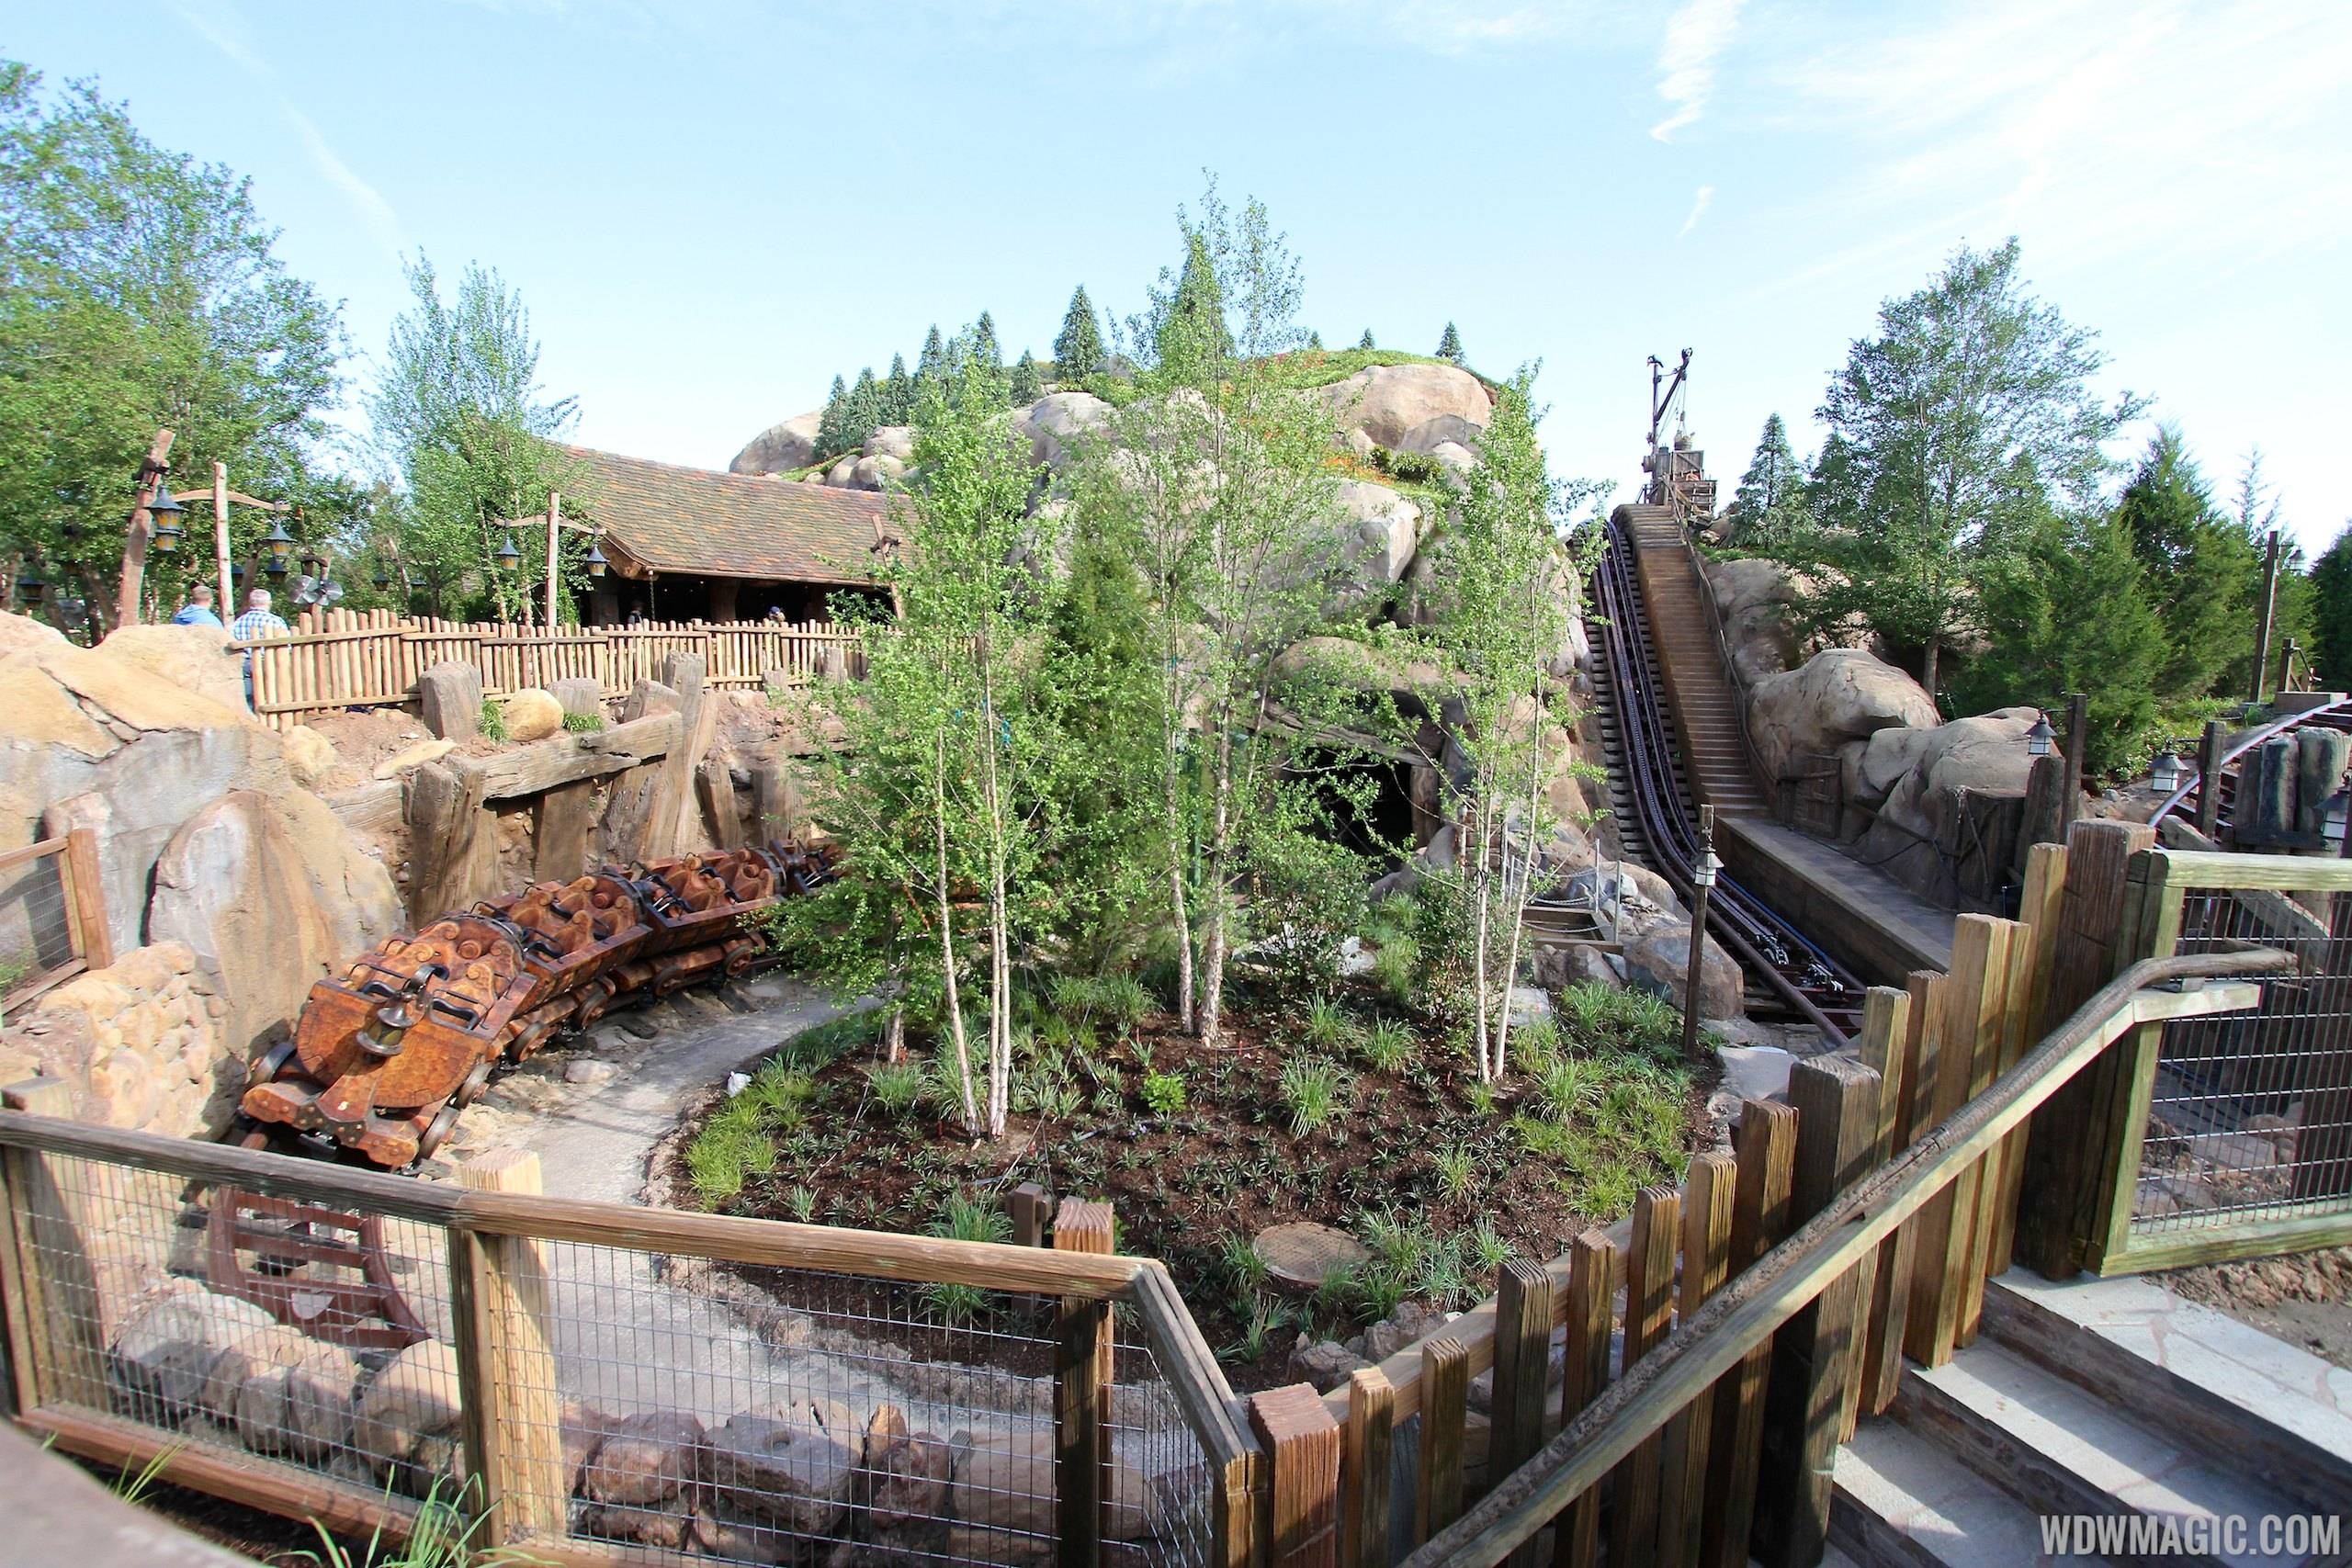 PHOTOS - Walls down reveal lift hill at Seven Dwarfs Mine Train coaster as filming for commercials takes place